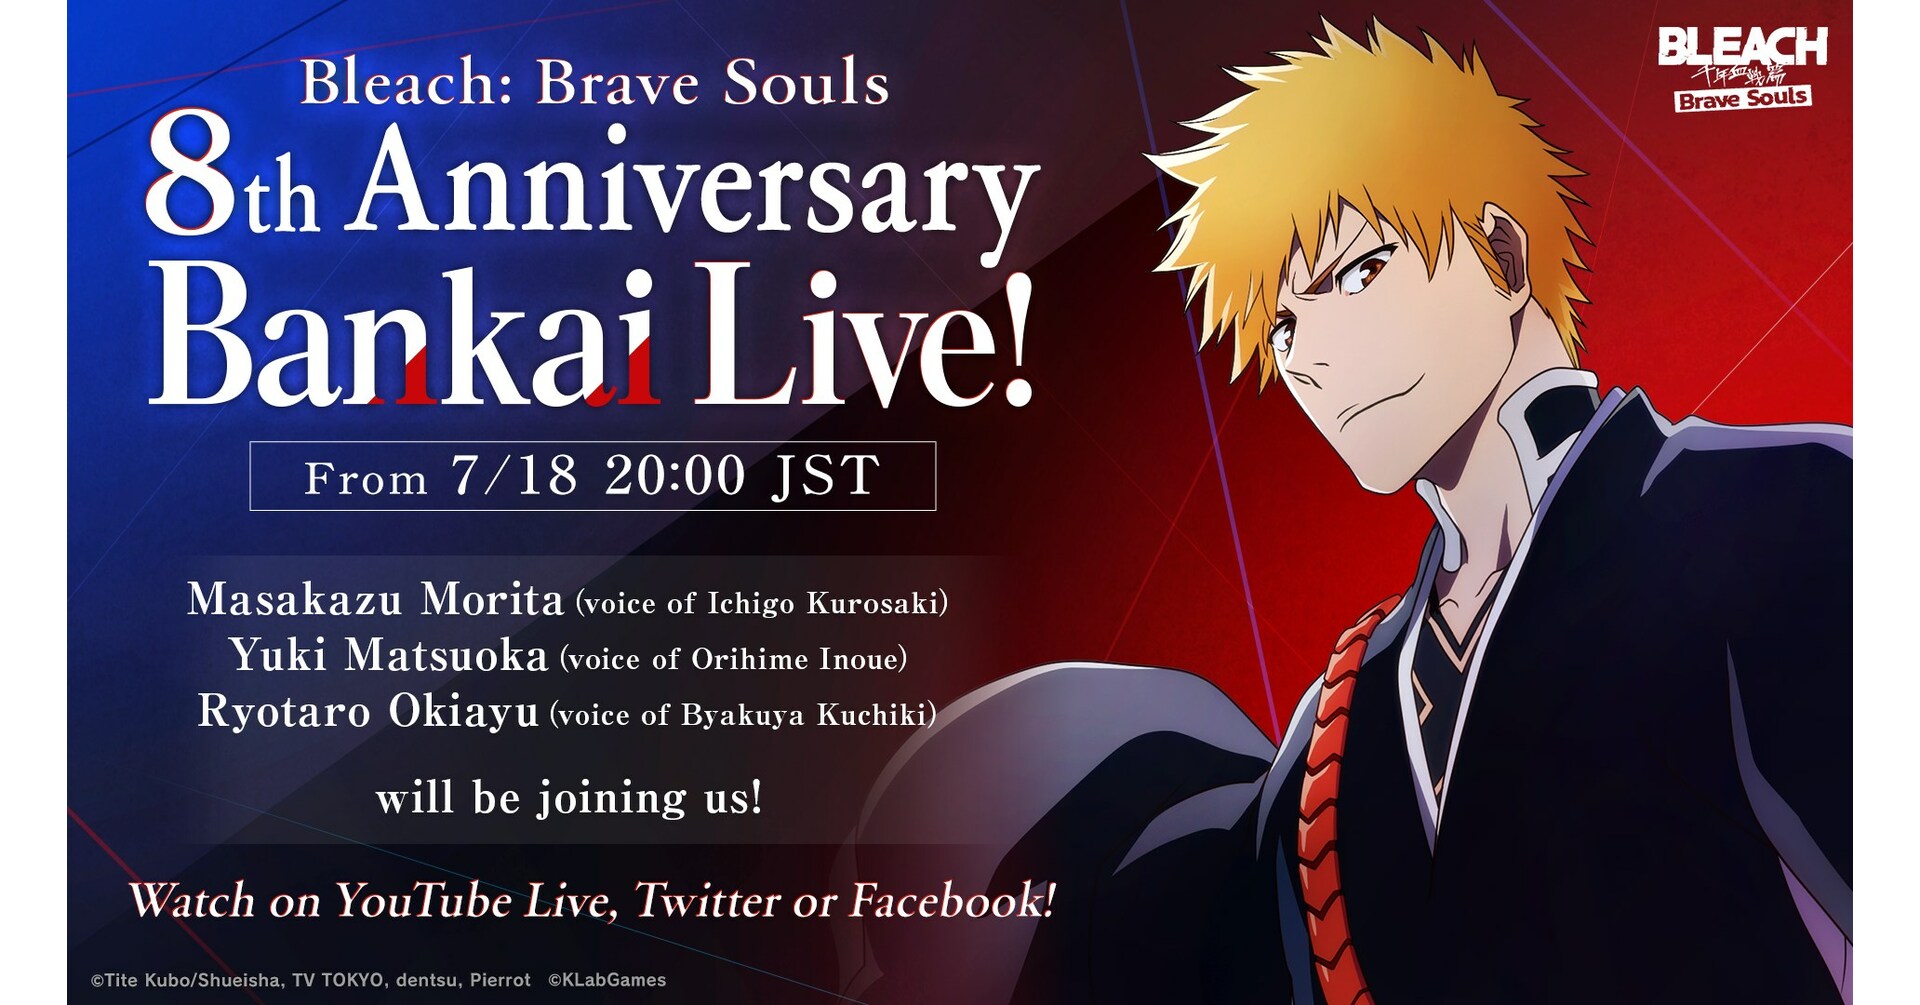 Bleach: Brave Souls Bankai Live Soul Reapers vs Quincies Special! Airs  Sunday, August 27 - PR Newswire APAC